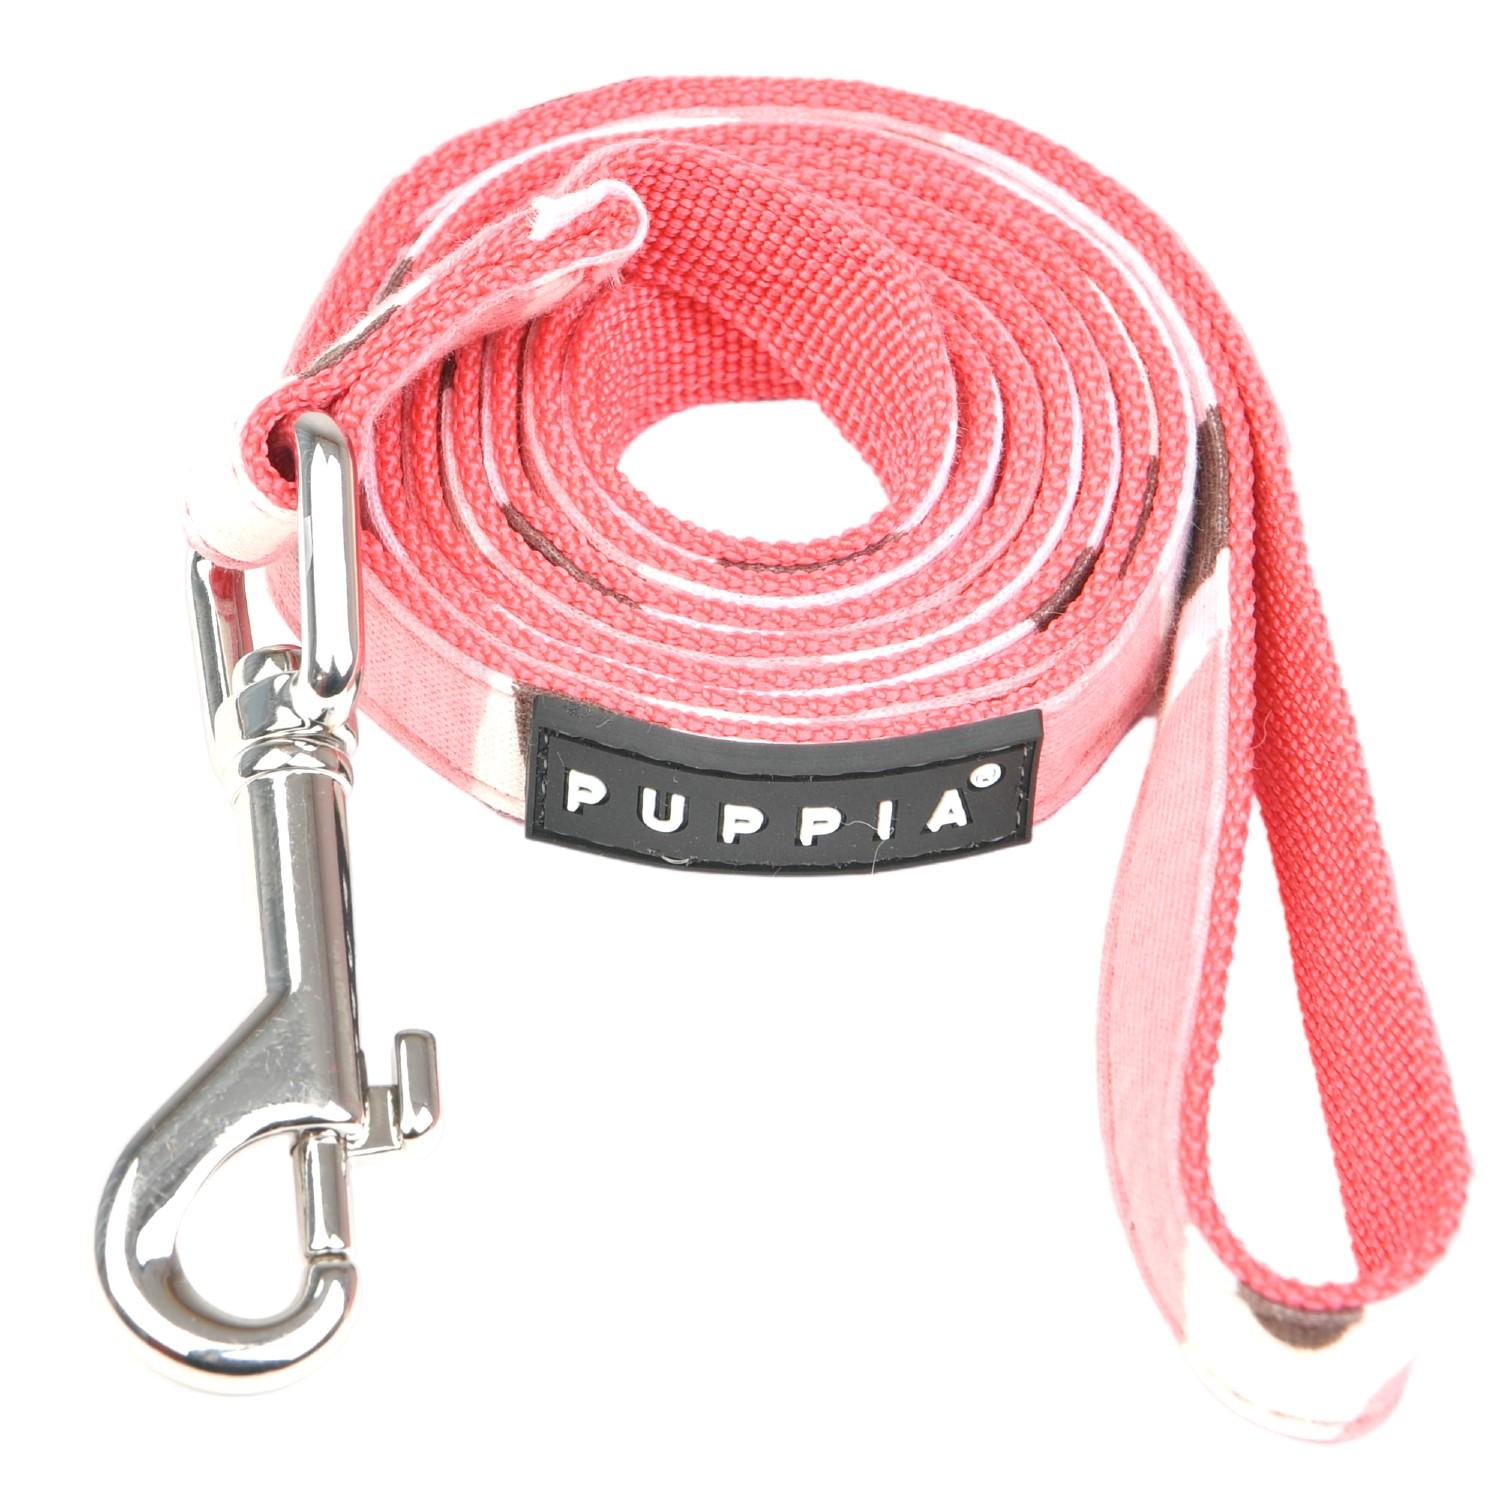 Lance Dog Leash by Puppia - Pink Camo